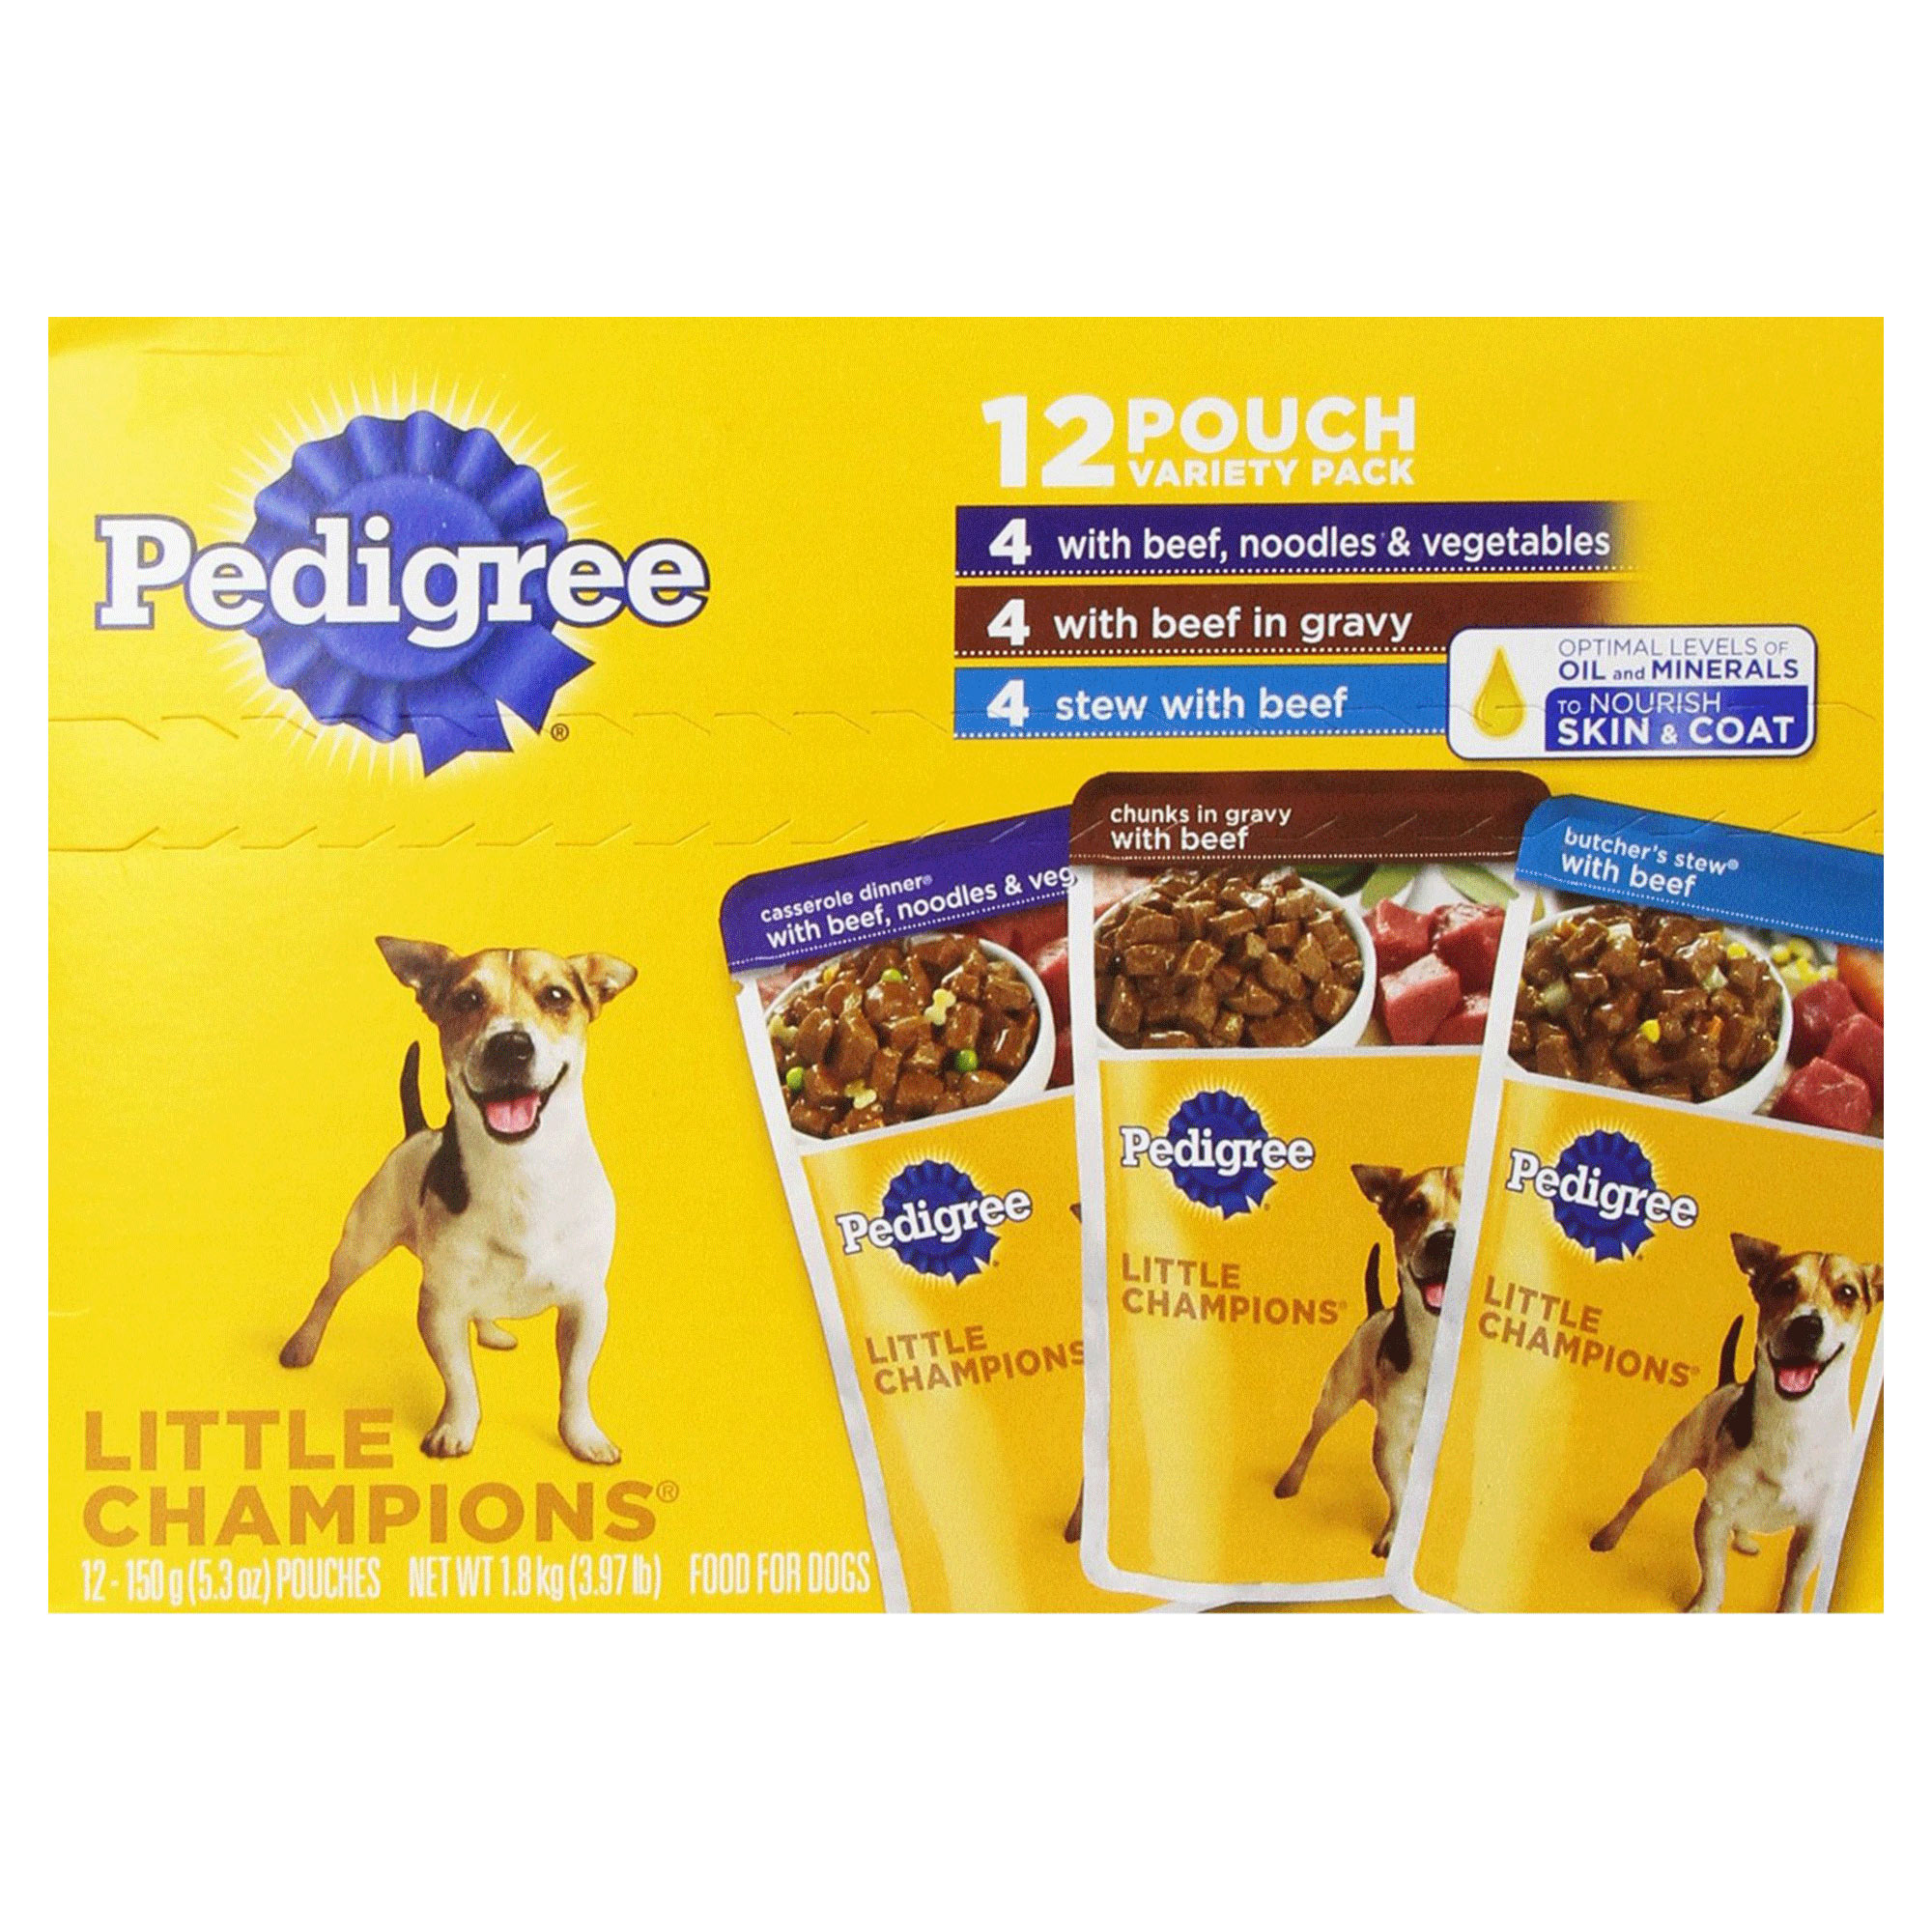 Pedigree Little Champions Pouch Variety Pack Dog Food, Pack Of 12 - image 1 of 4